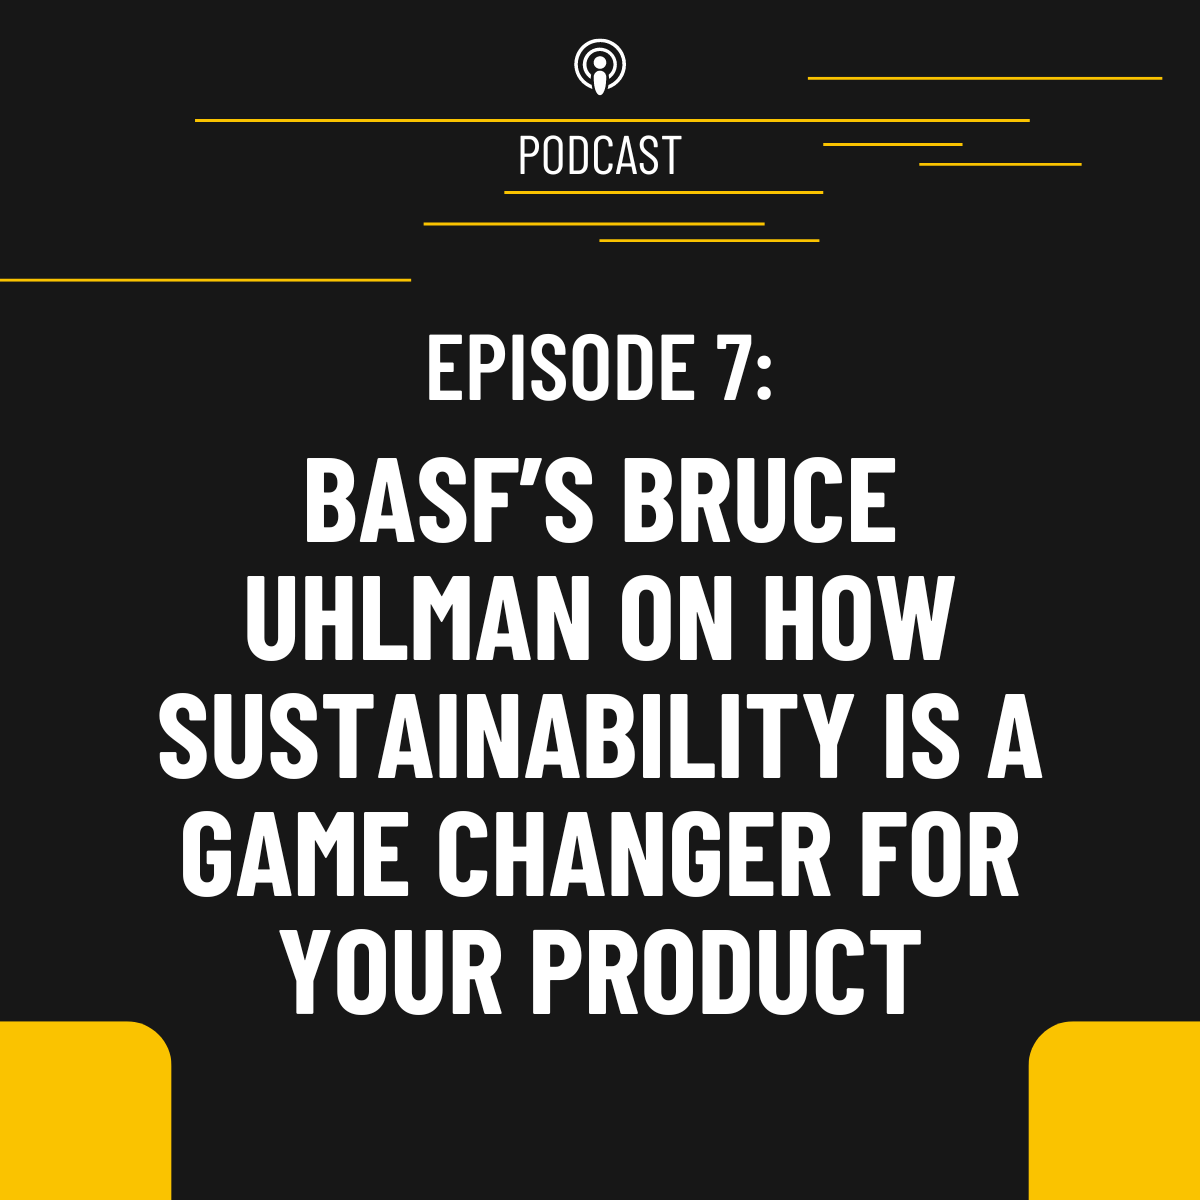 Episode 7: BASF’s Bruce Uhlman on how sustainability is a game changer for your product